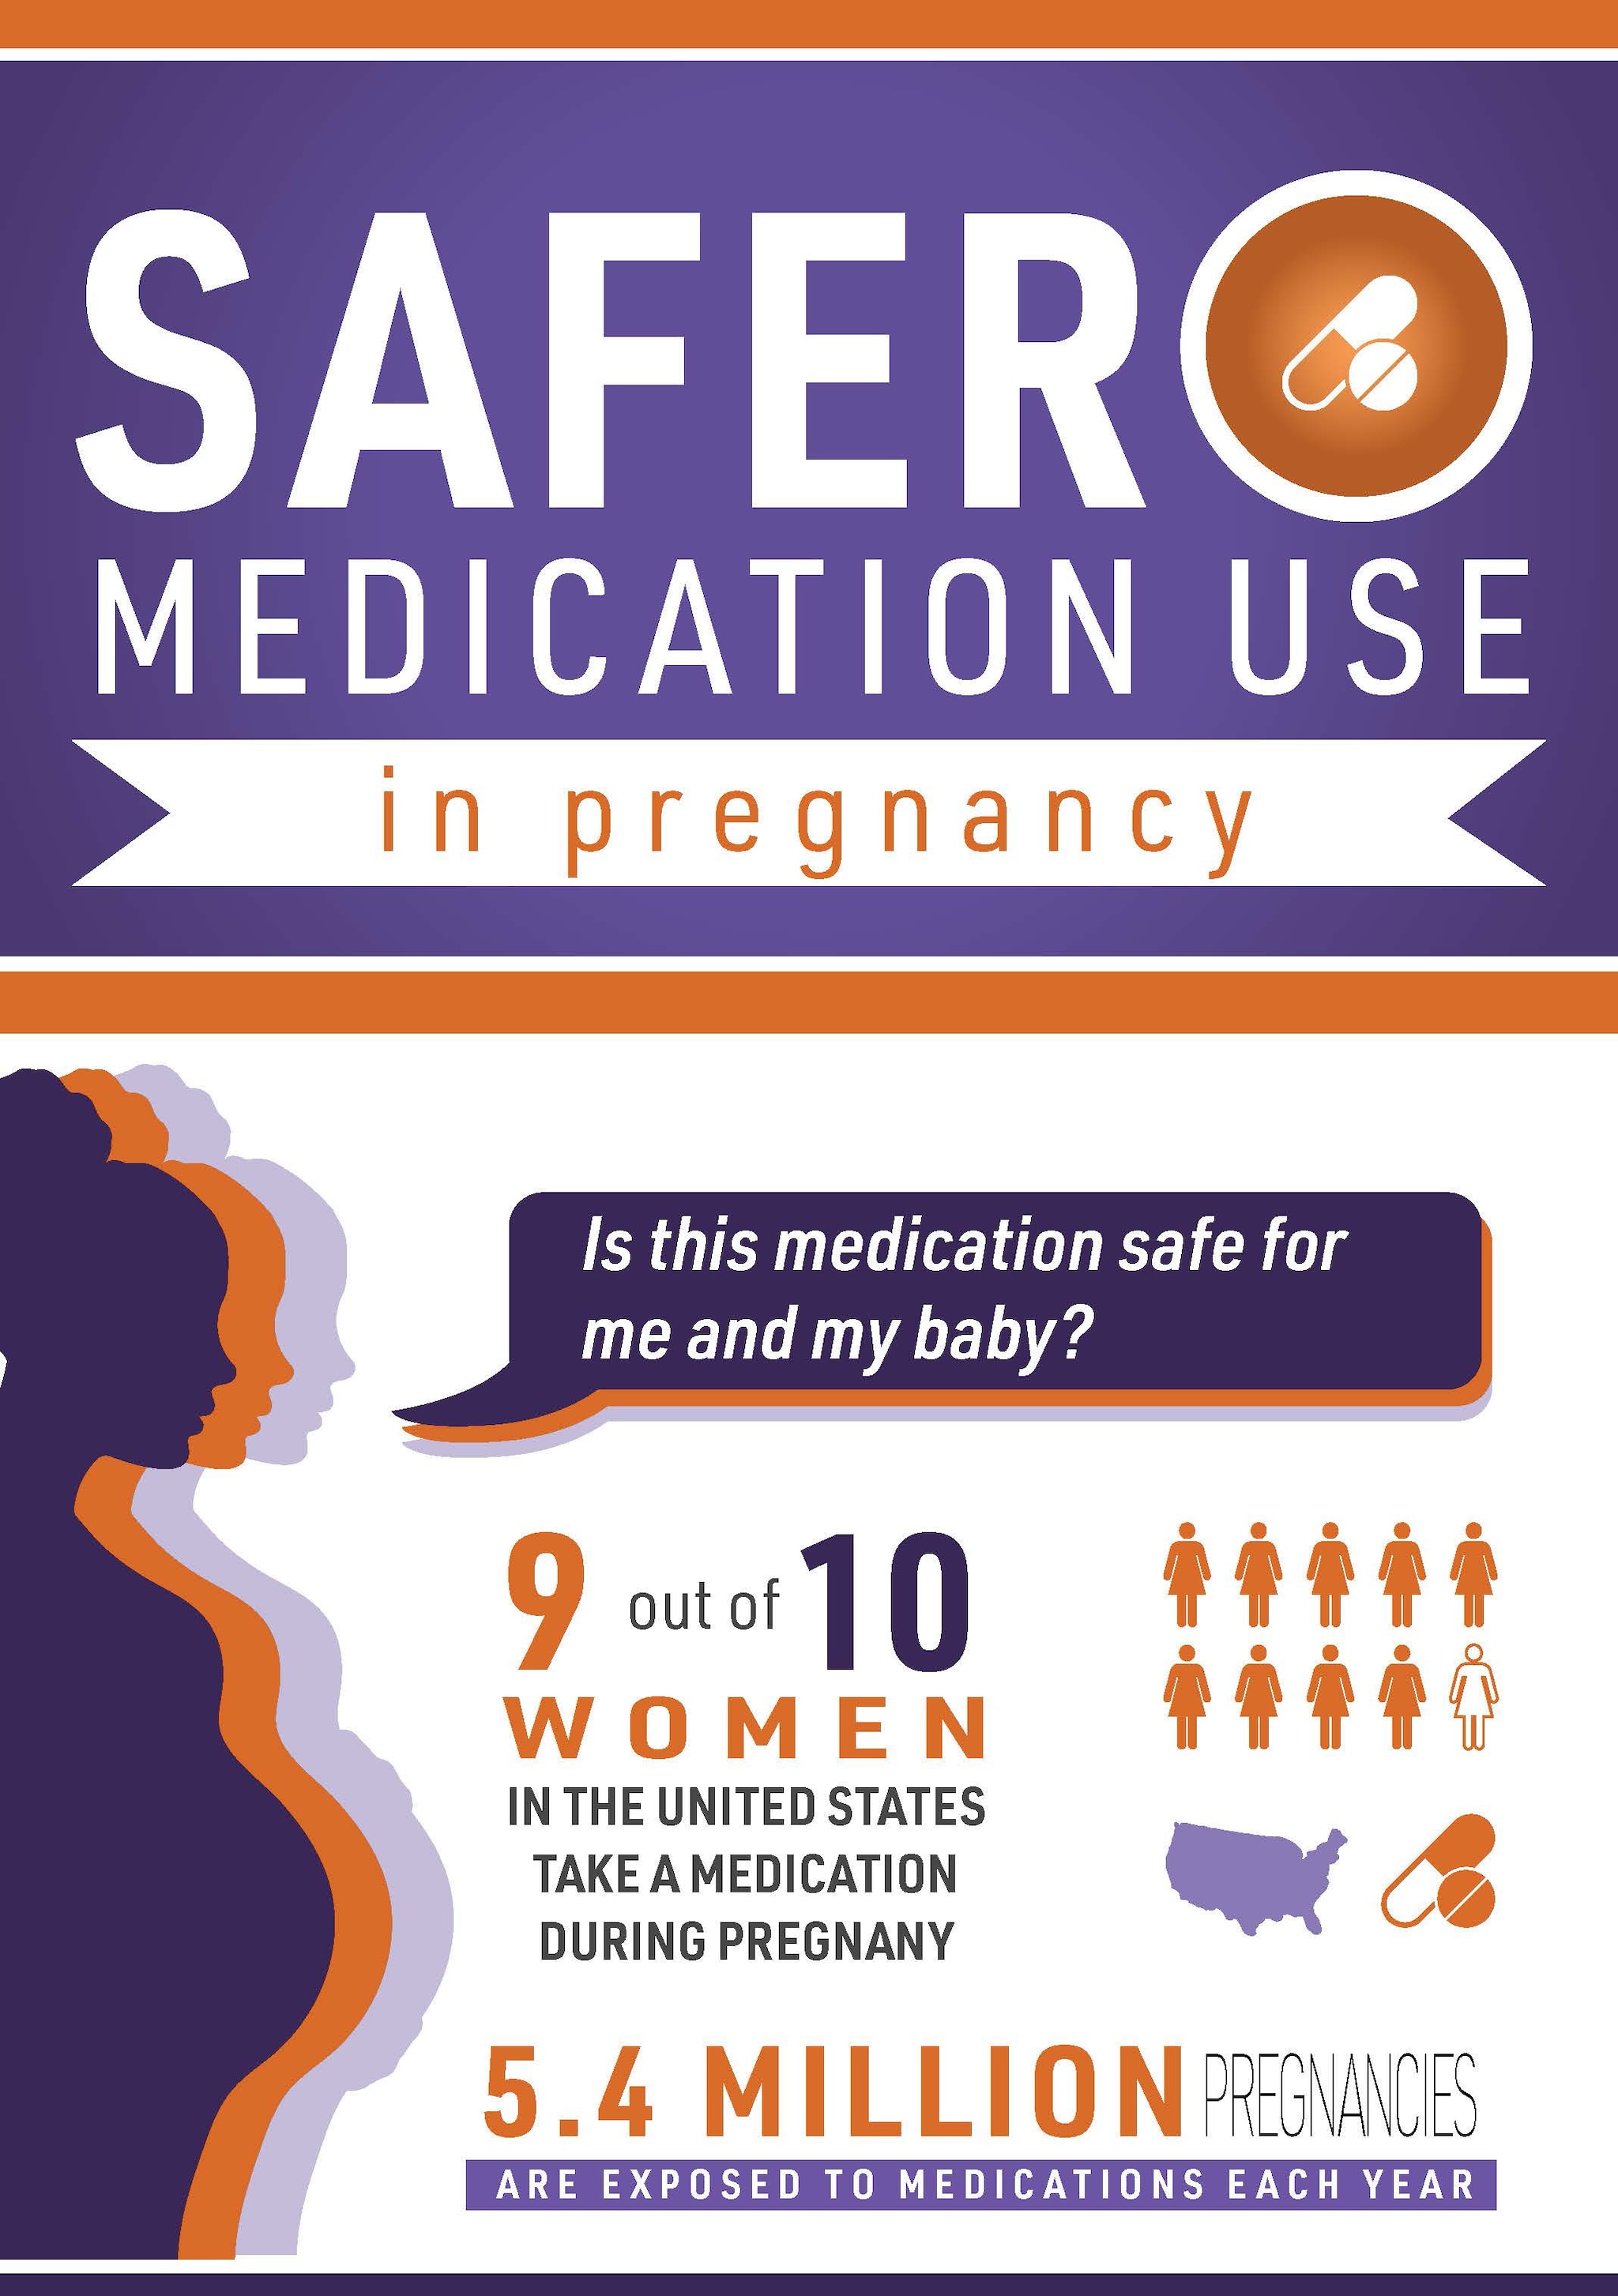 Safer Medication Use in Pregnancy infographic thumb